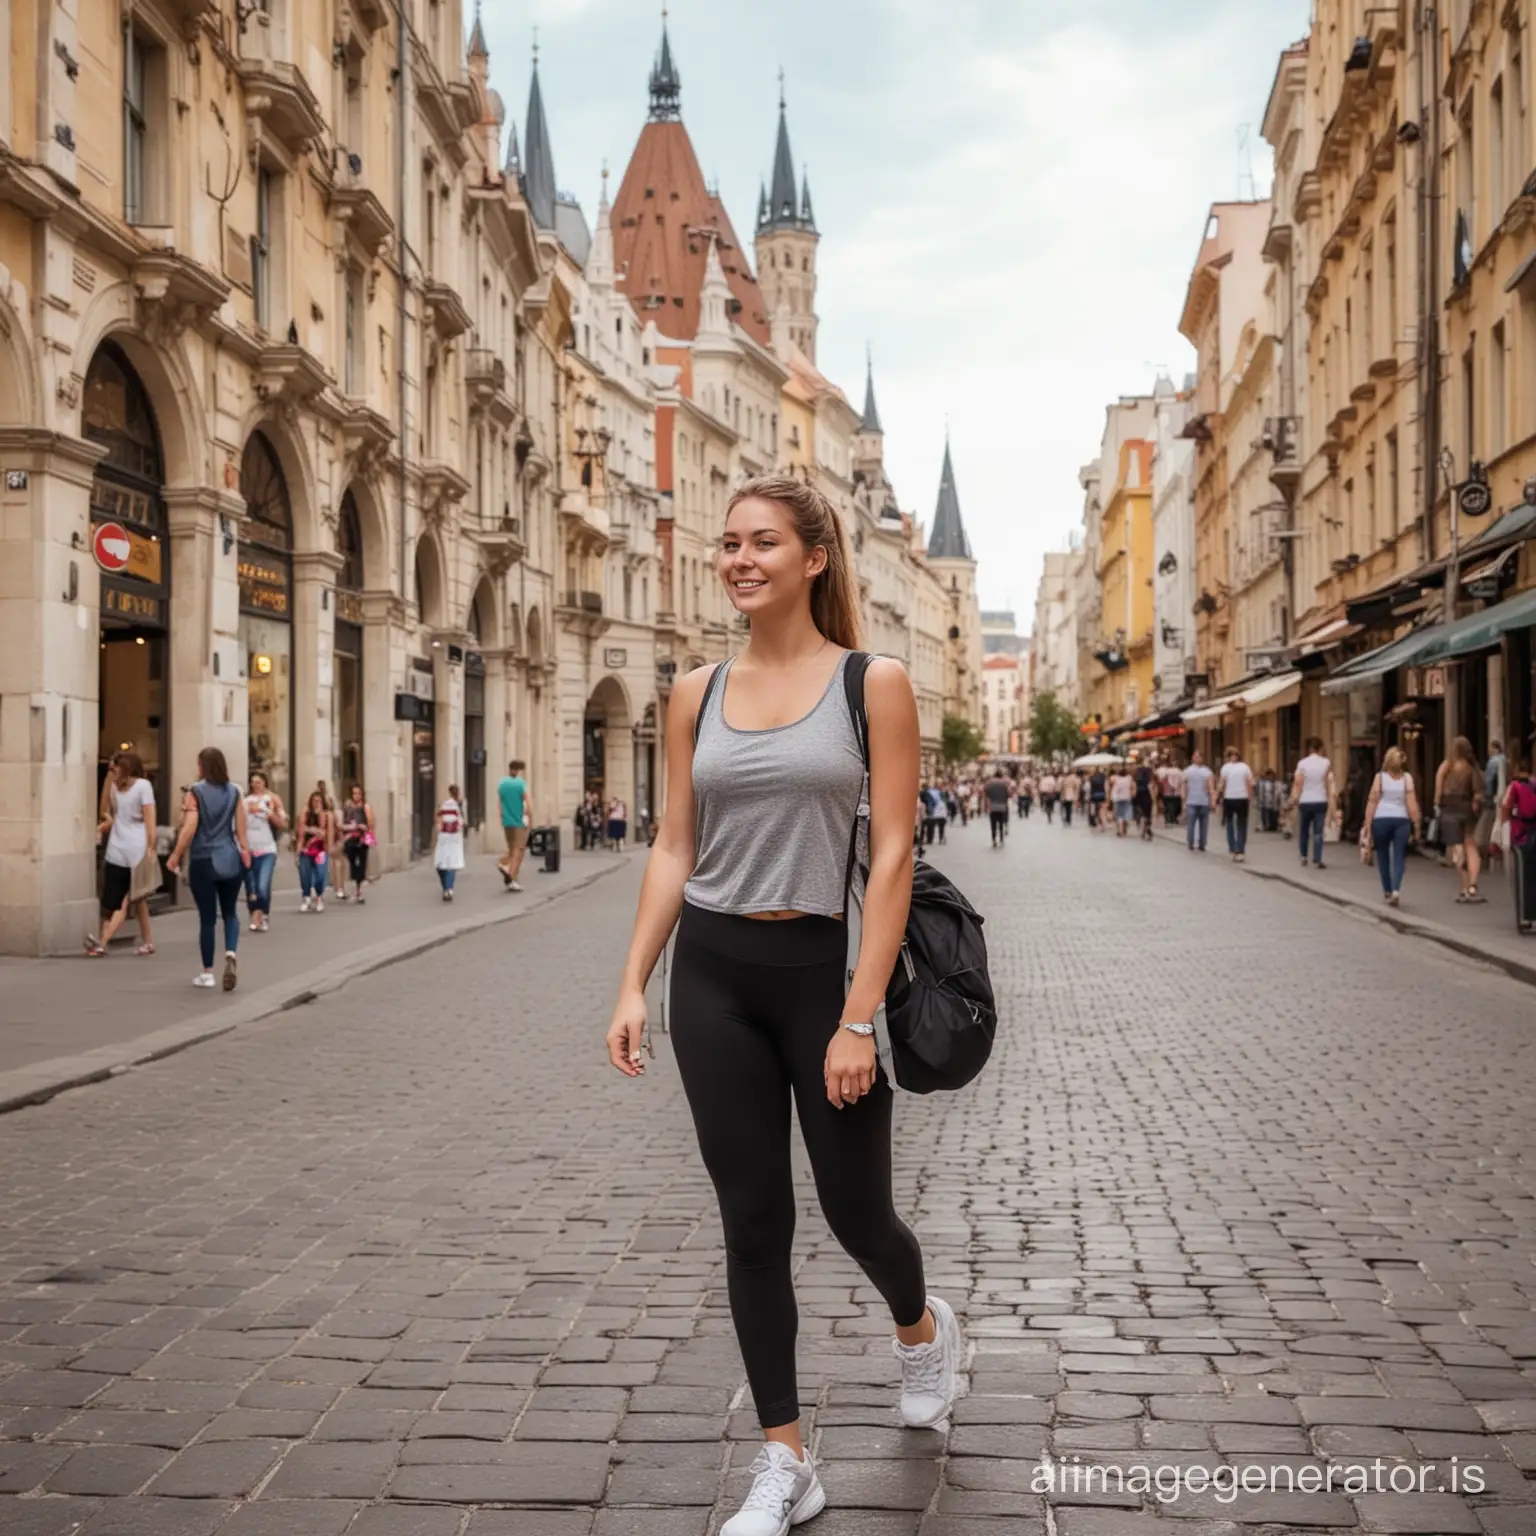 Twenty years old Auburn woman is a tourist in Budapest at a busy place. She wears sporty outfit cropped leggings and sport top, has her cellphone at hand, backpack is on her back.